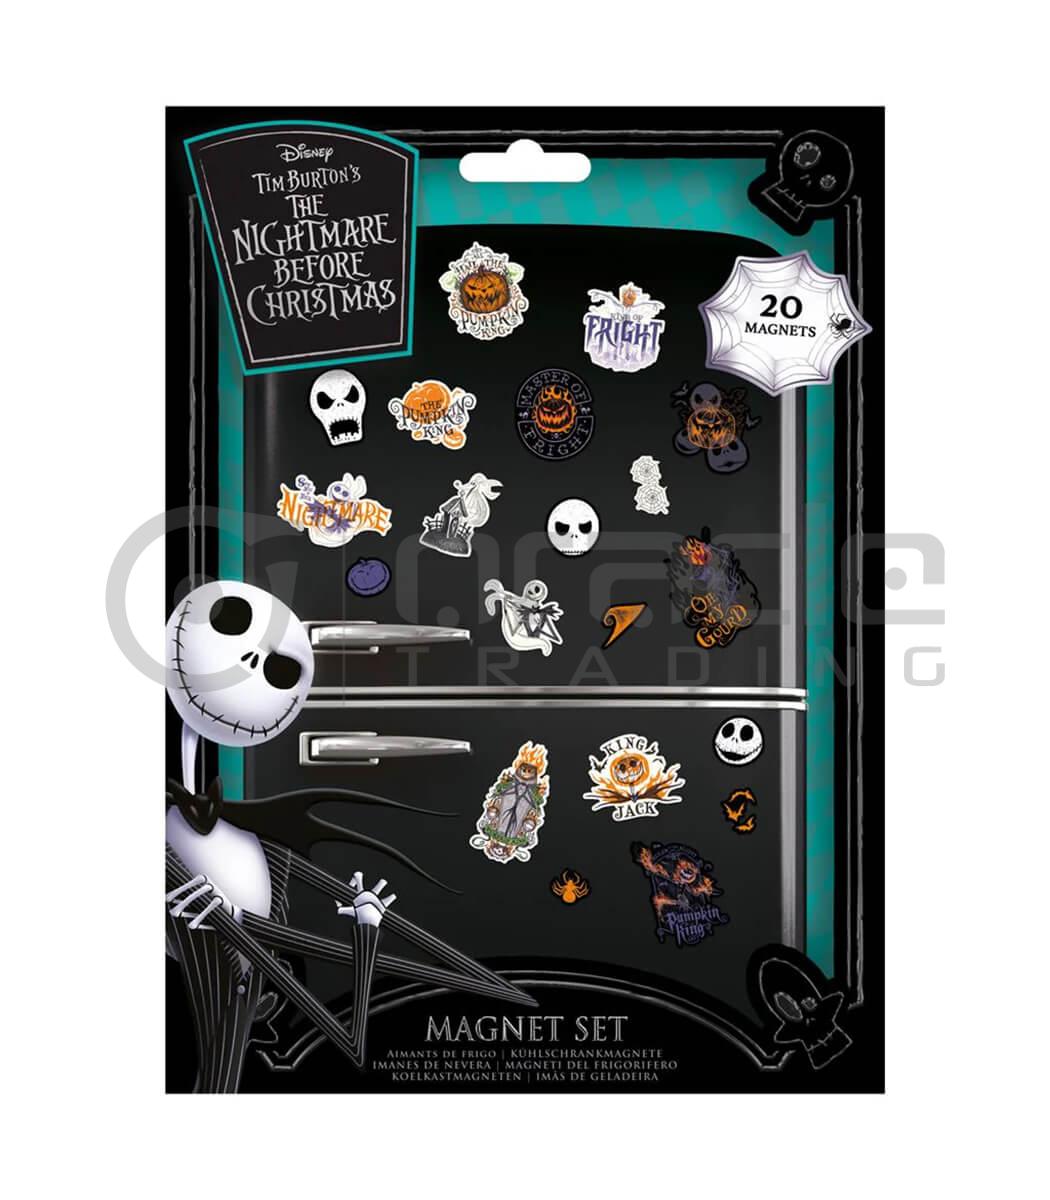 Nightmare Before Christmas Magnet Set (20 Pieces)